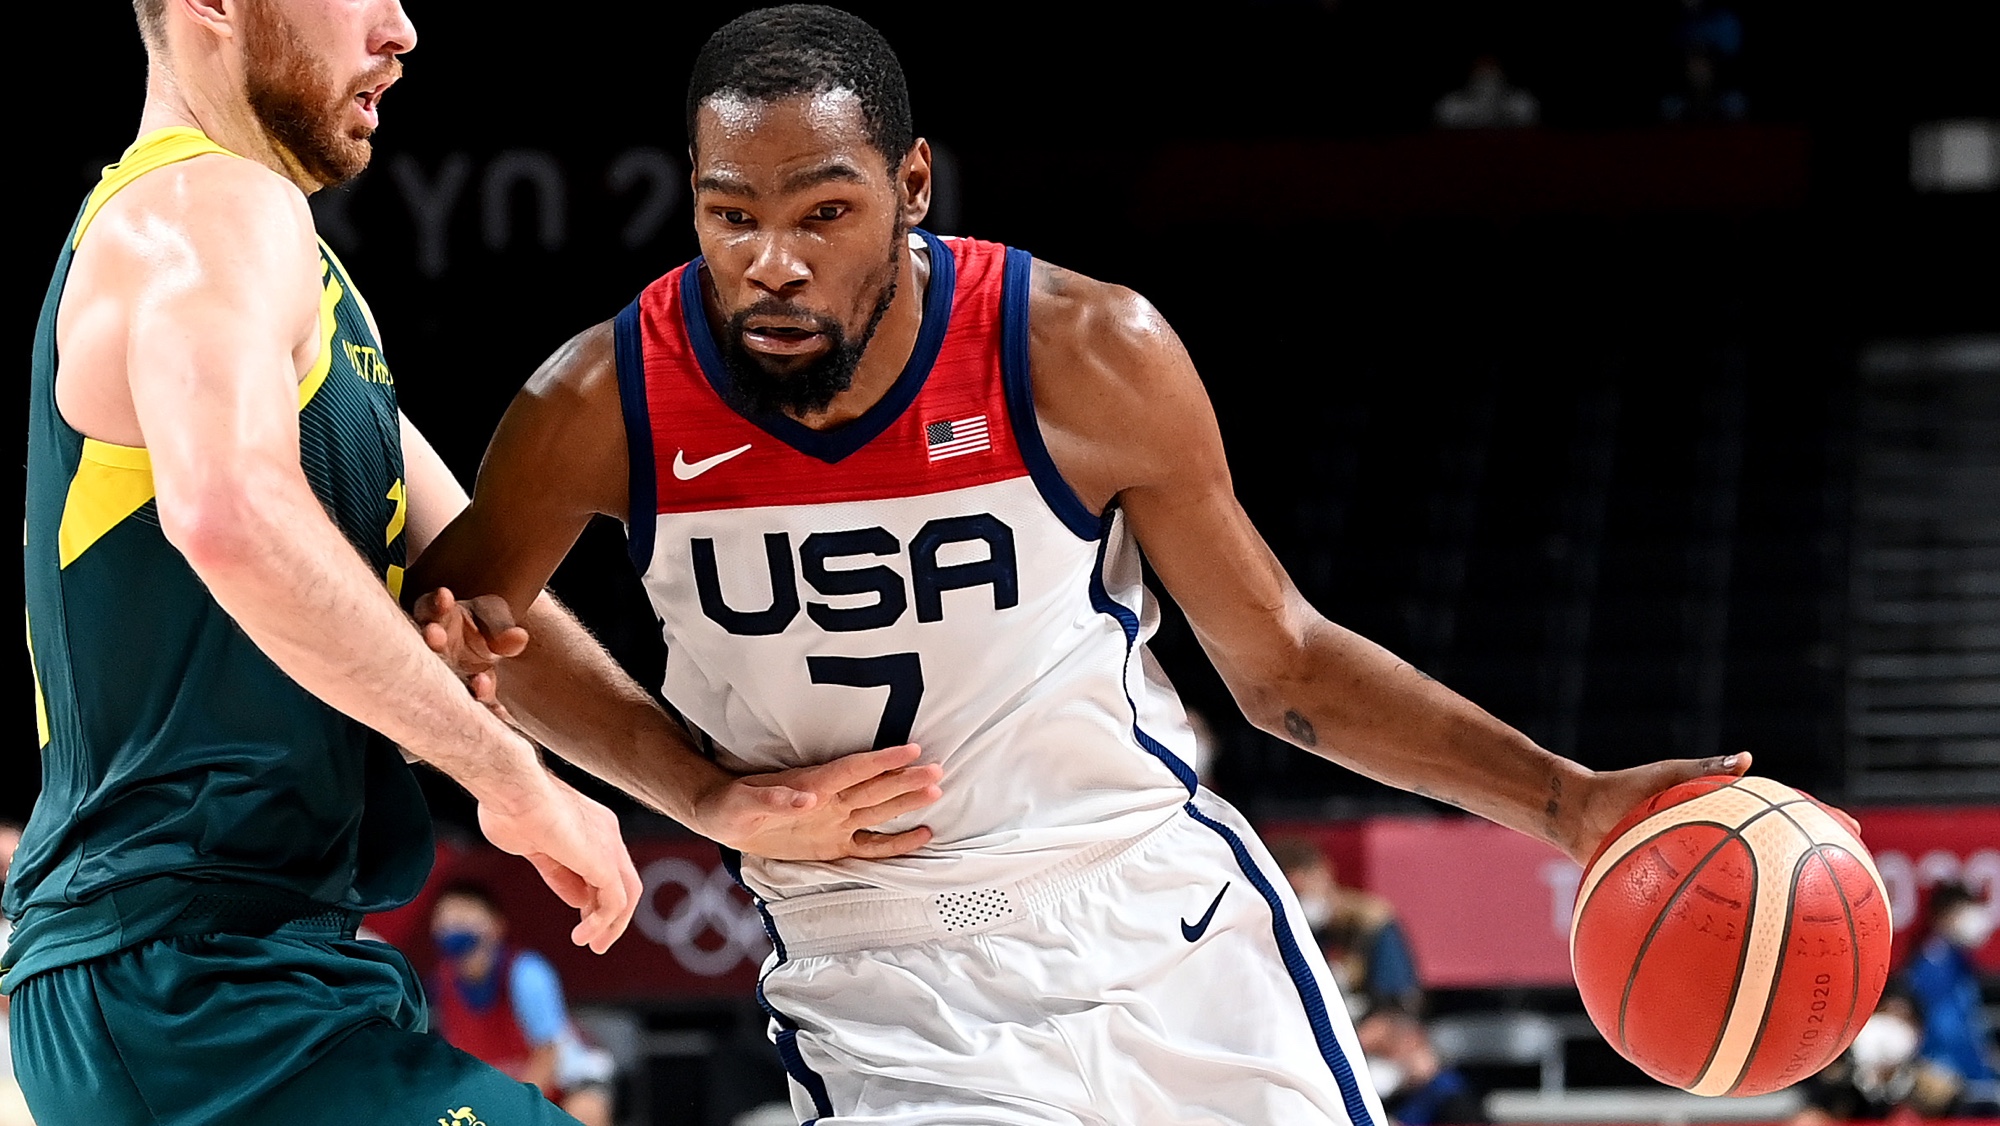 Team Usa Vs France Men S Basketball Live Stream Olympics Channels Start Time And How To Watch Online Tom S Guide